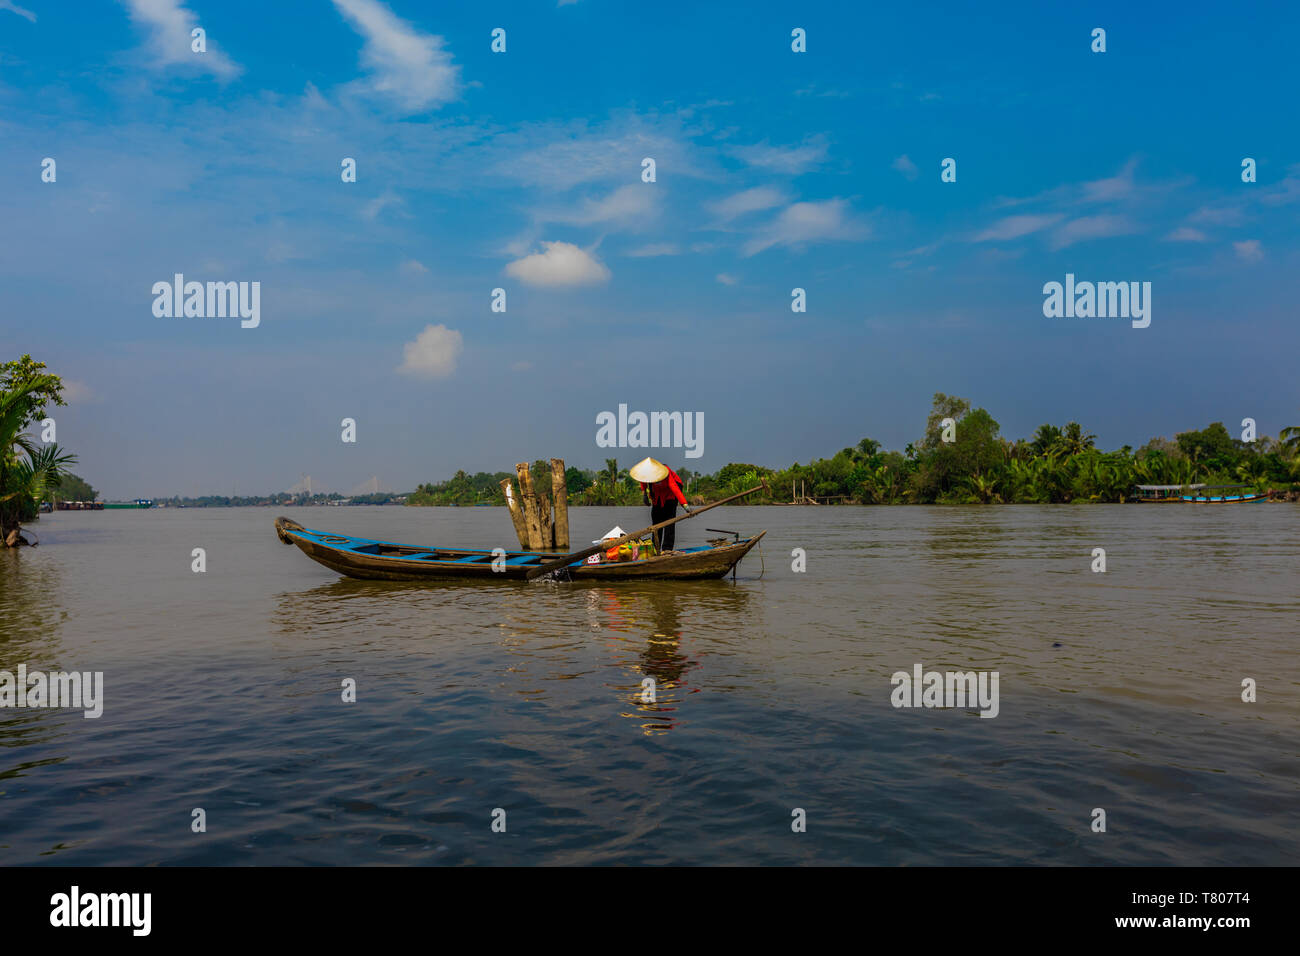 Fisherman on the river, Vietnam, Indochina, Southeast Asia, Asia Stock Photo